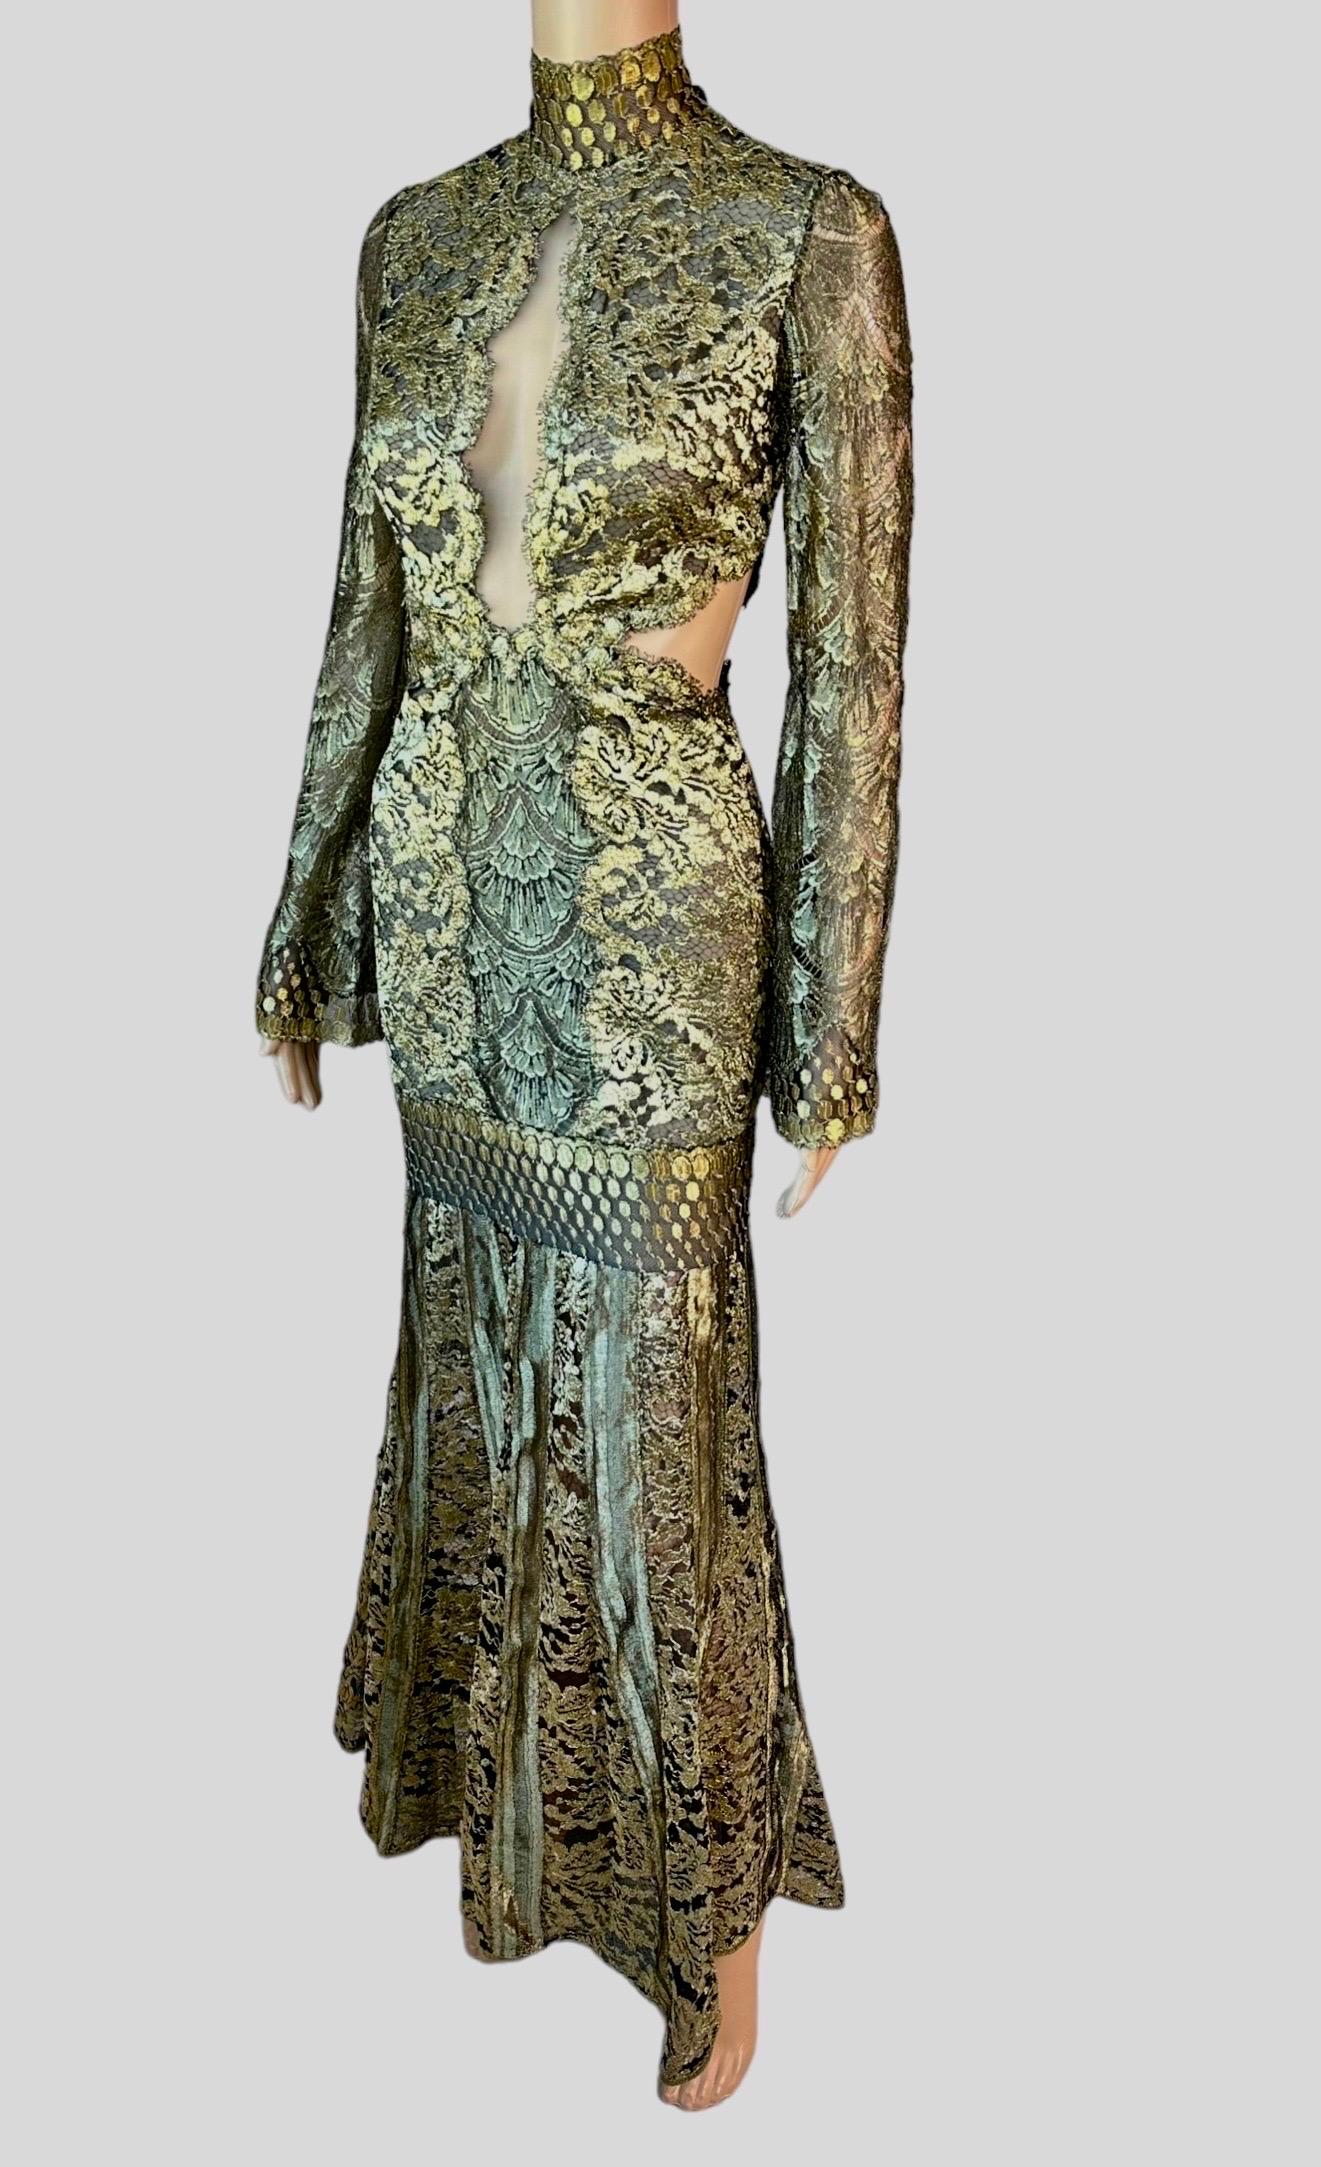 Roberto Cavalli F/W 2016 Runway Gold Sheer Lace Evening Dress Gown For Sale 7